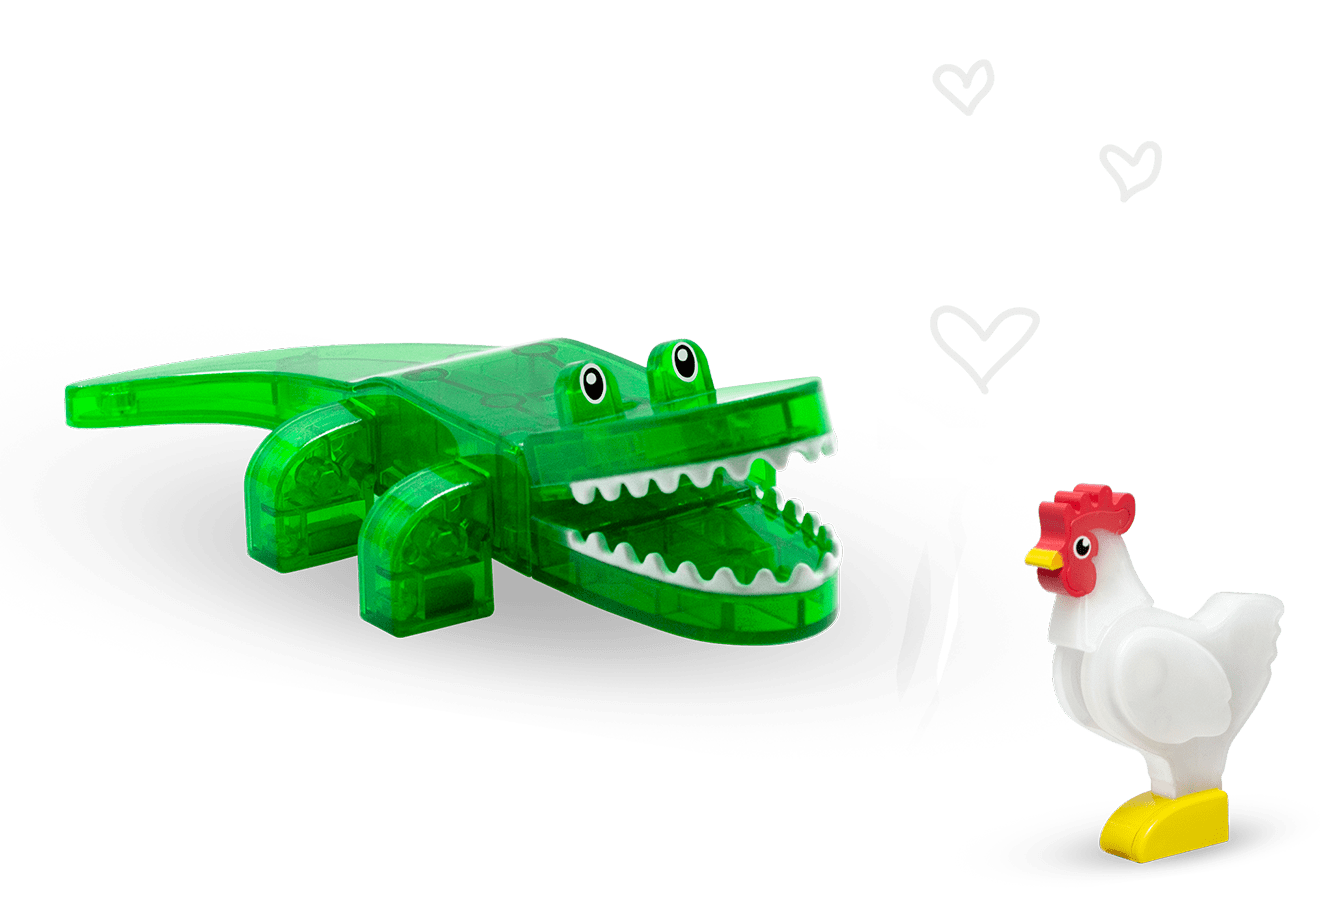 MAGNA-TILES® green caiman and white chicken figurines